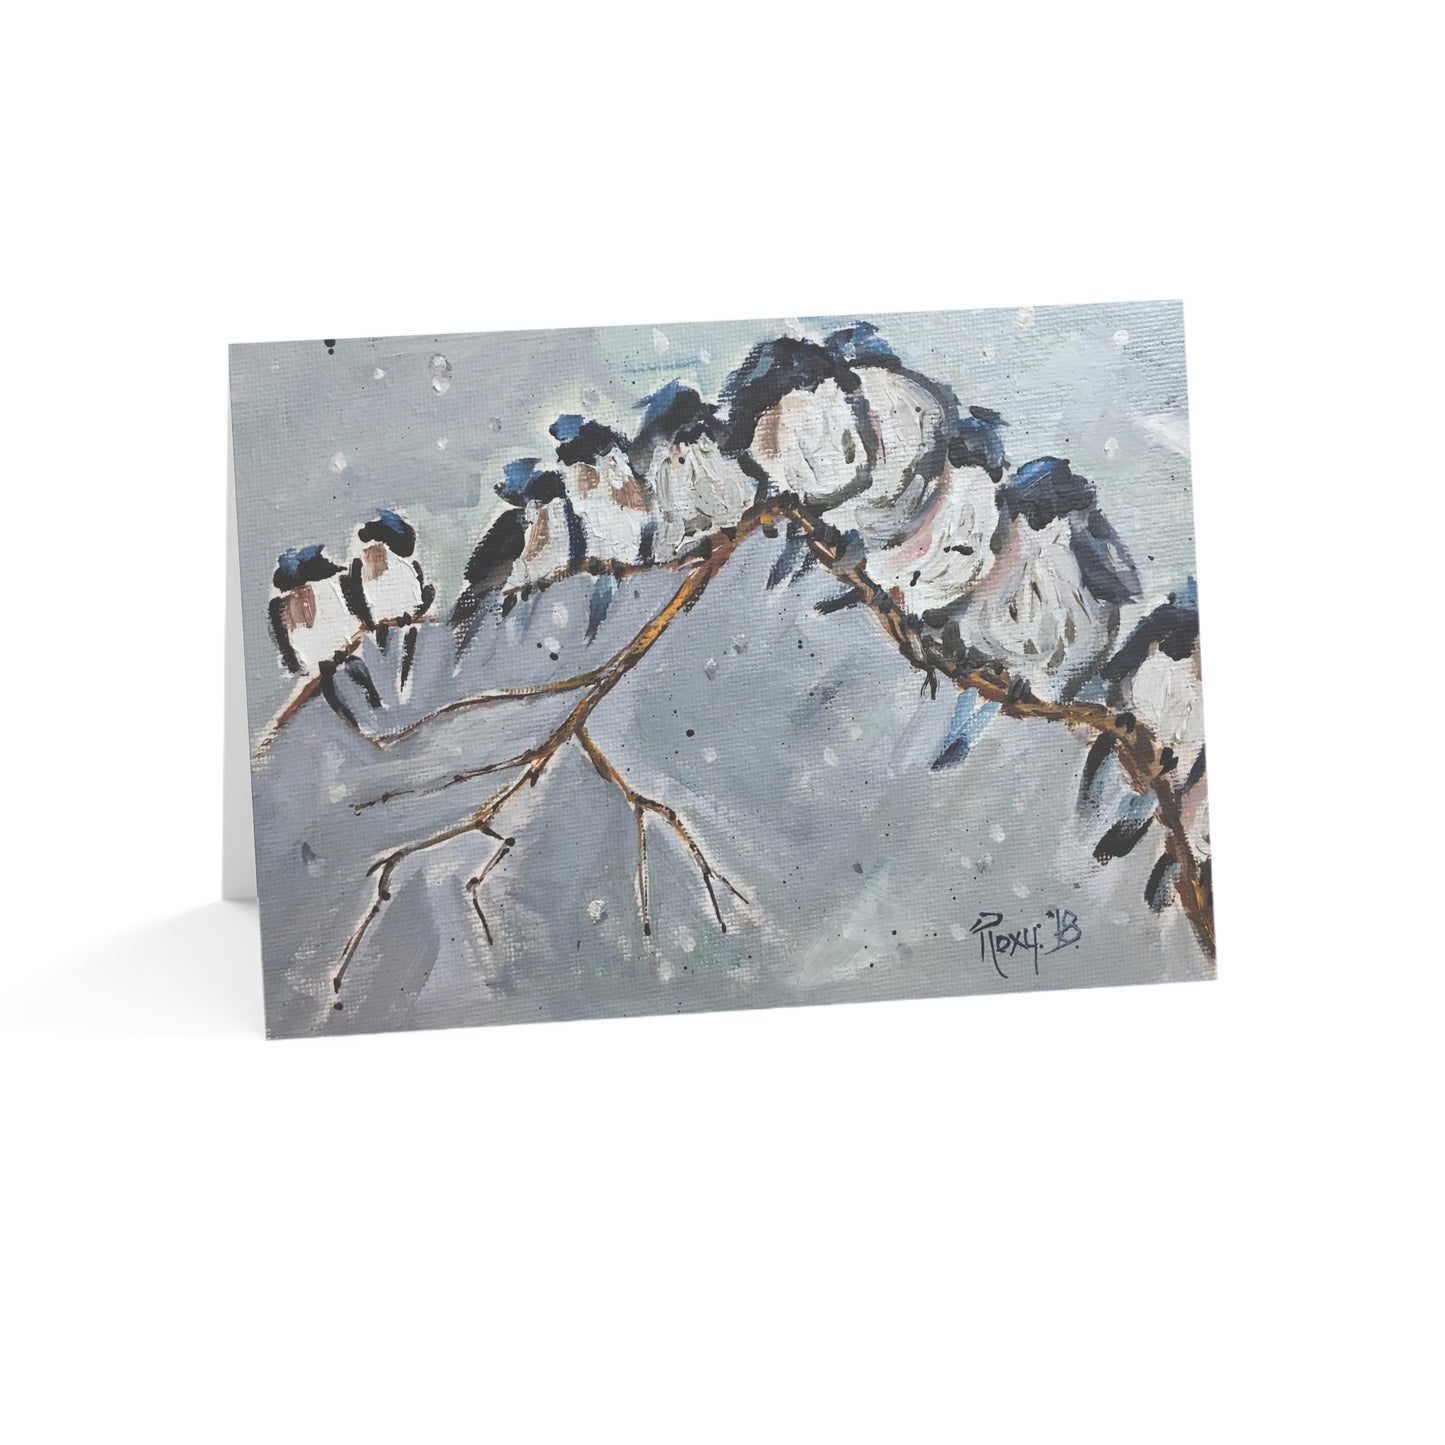 Group Hug Family of Wrens in the Snow Greeting Cards